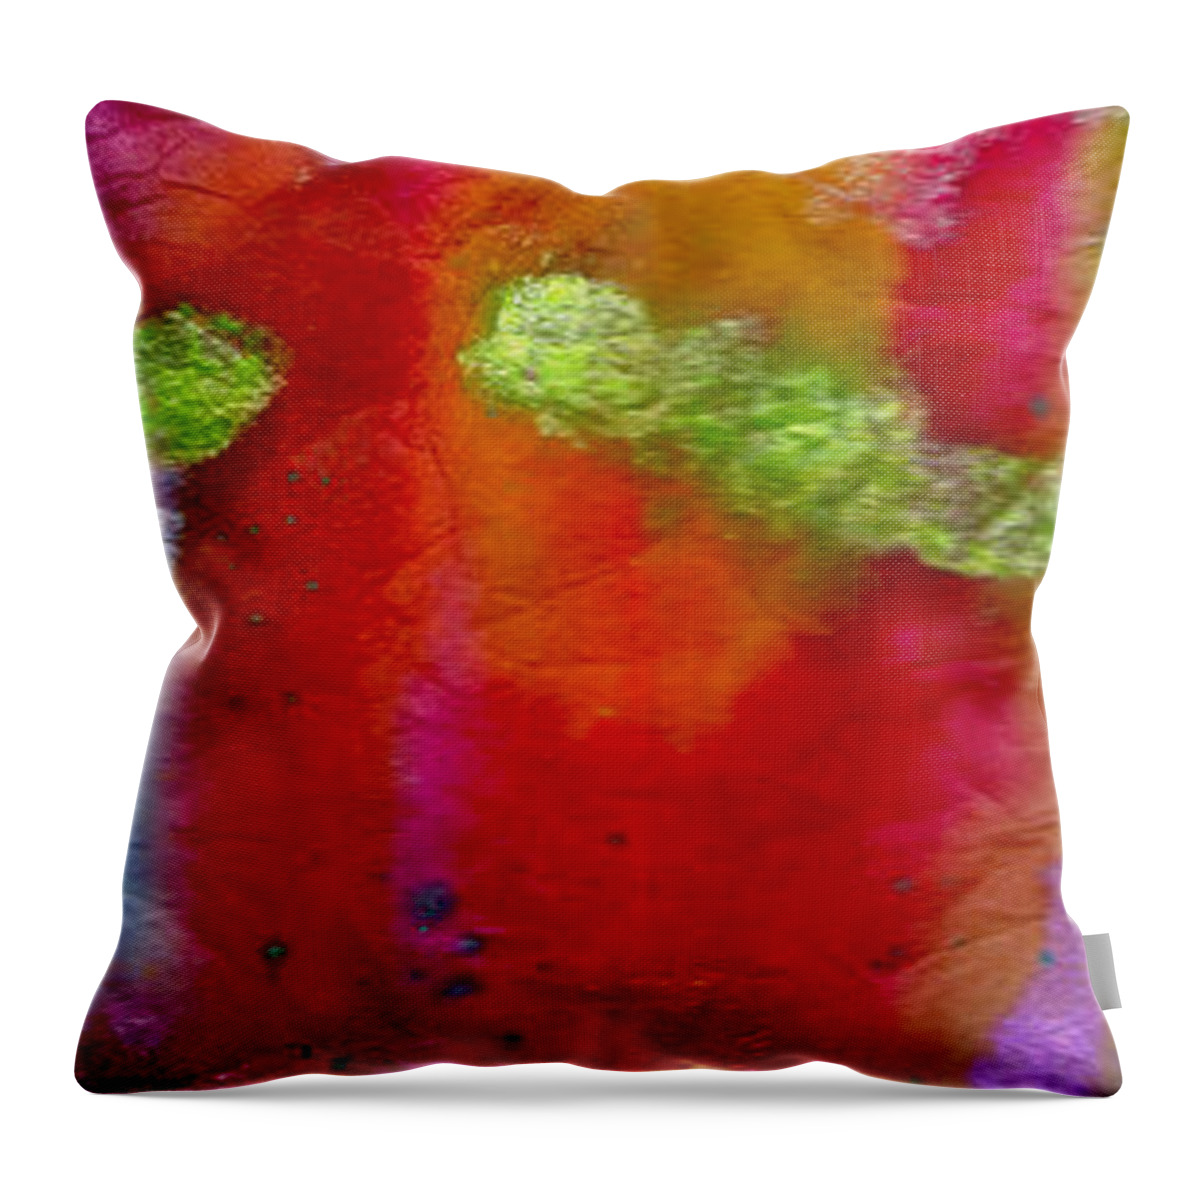 Rainbow Throw Pillow featuring the painting Rainbow Passion by Angela L Walker